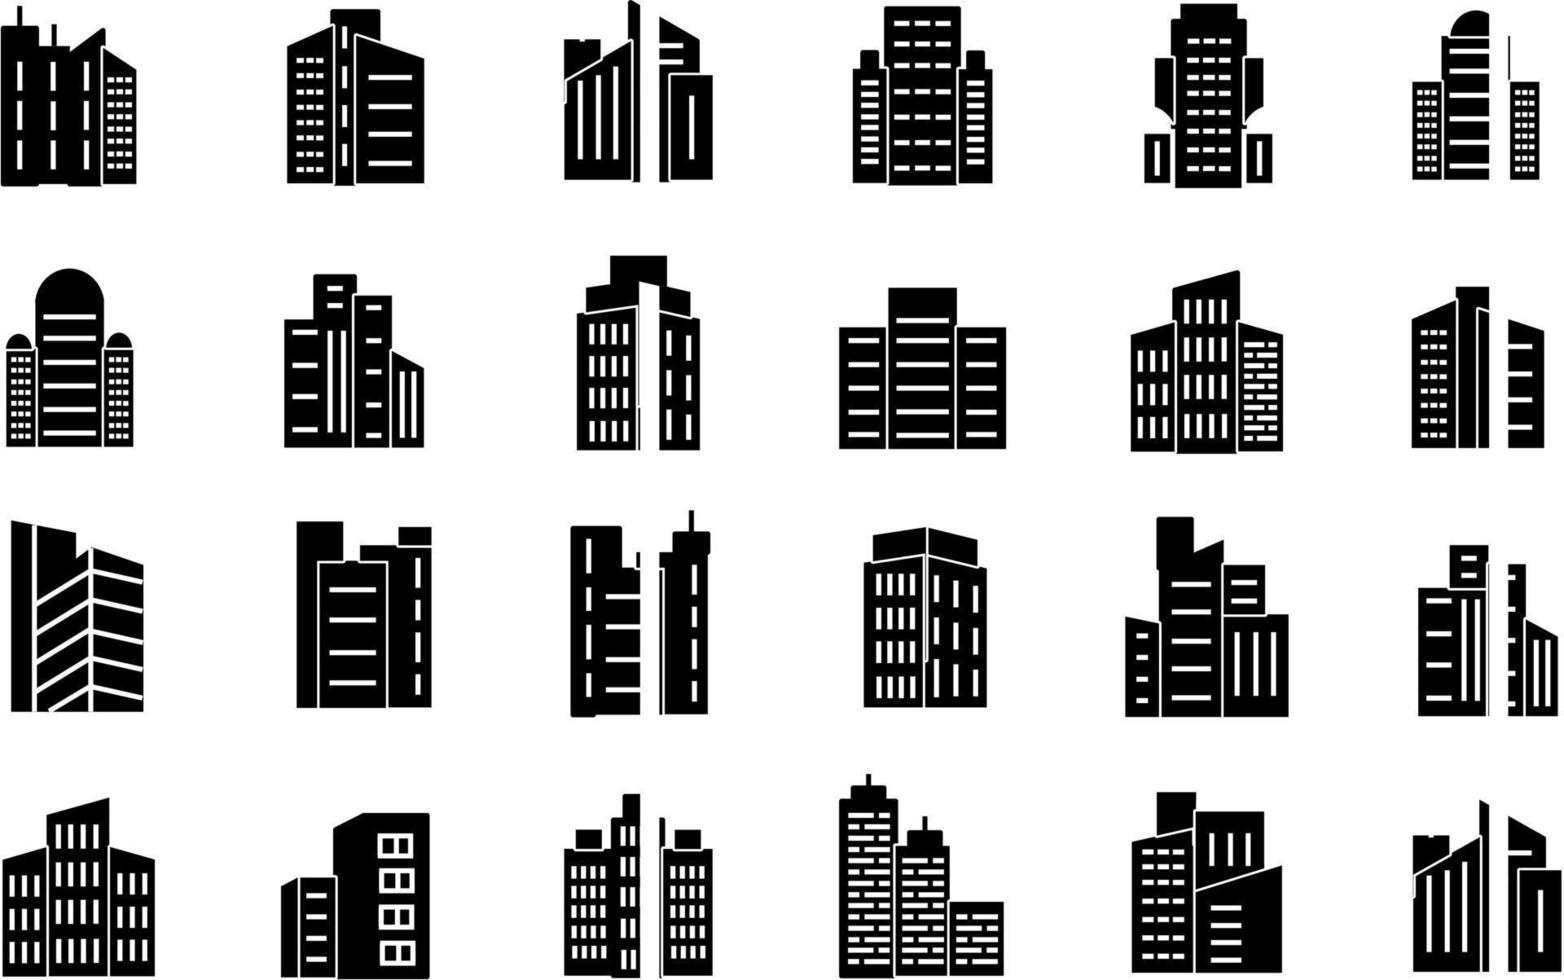 24 icons building illustration on white background vector